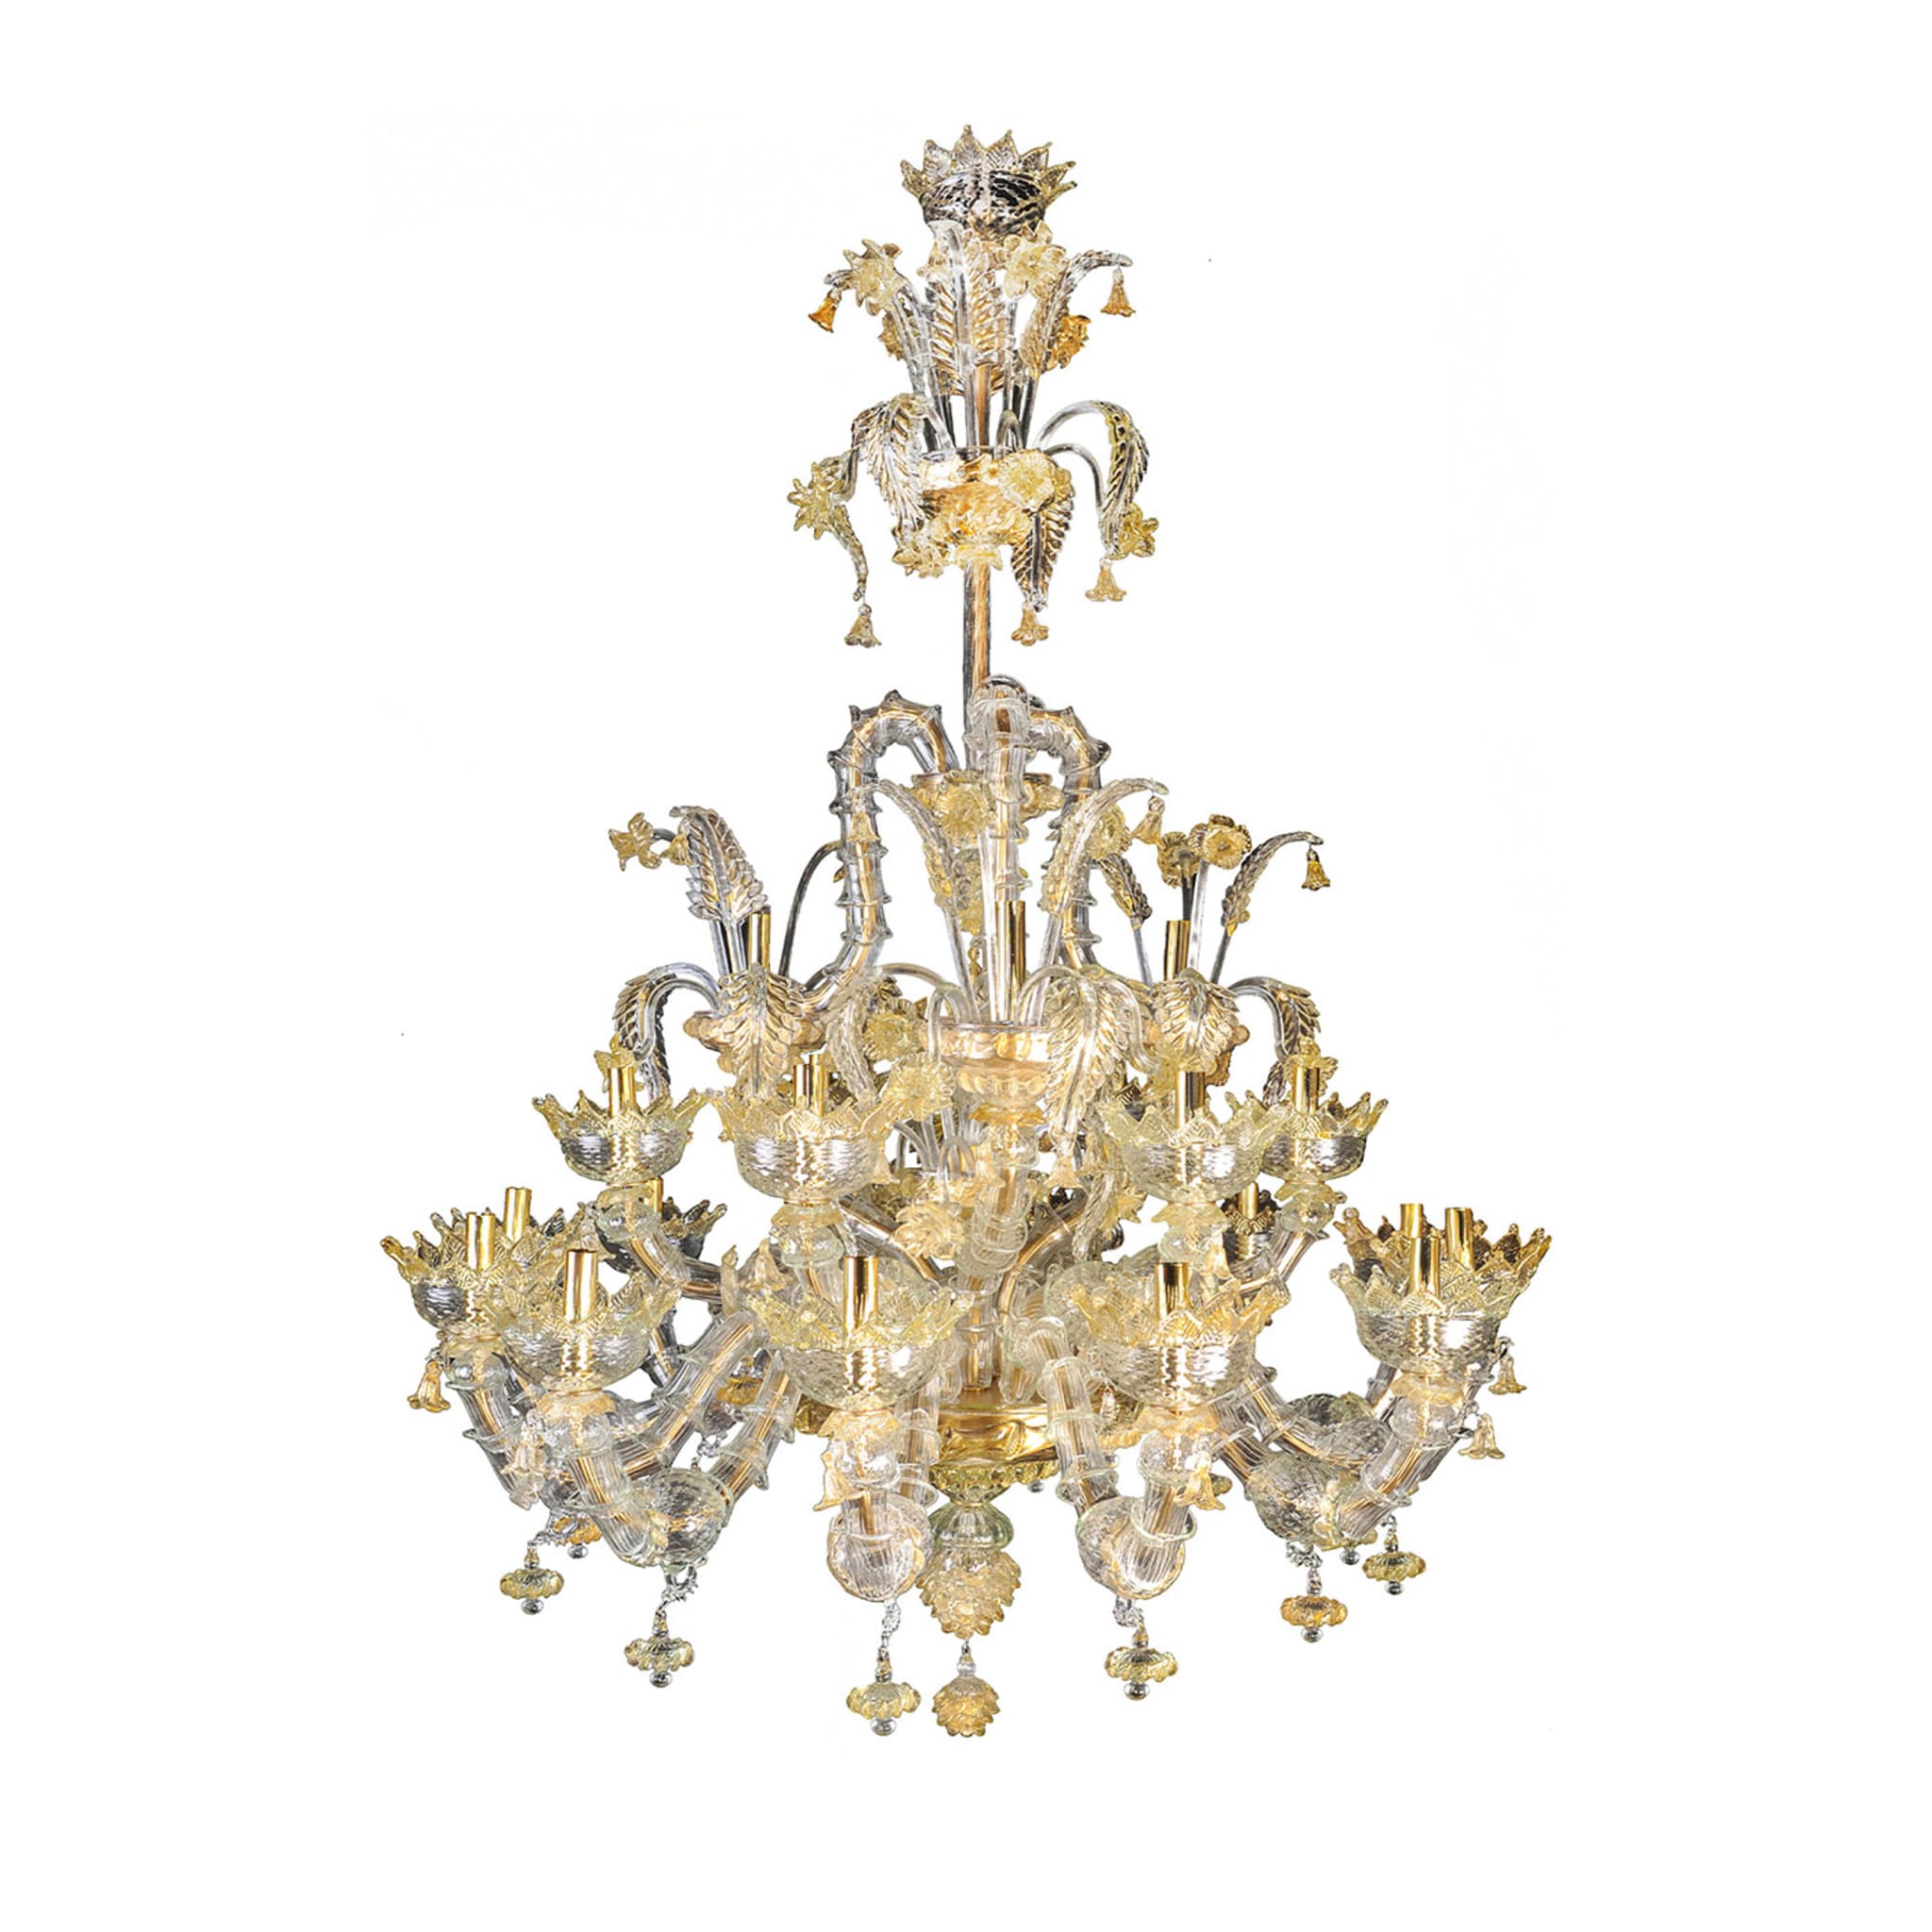 Rezzonico-style Gold and Crystal Chandelier #6 - Main view